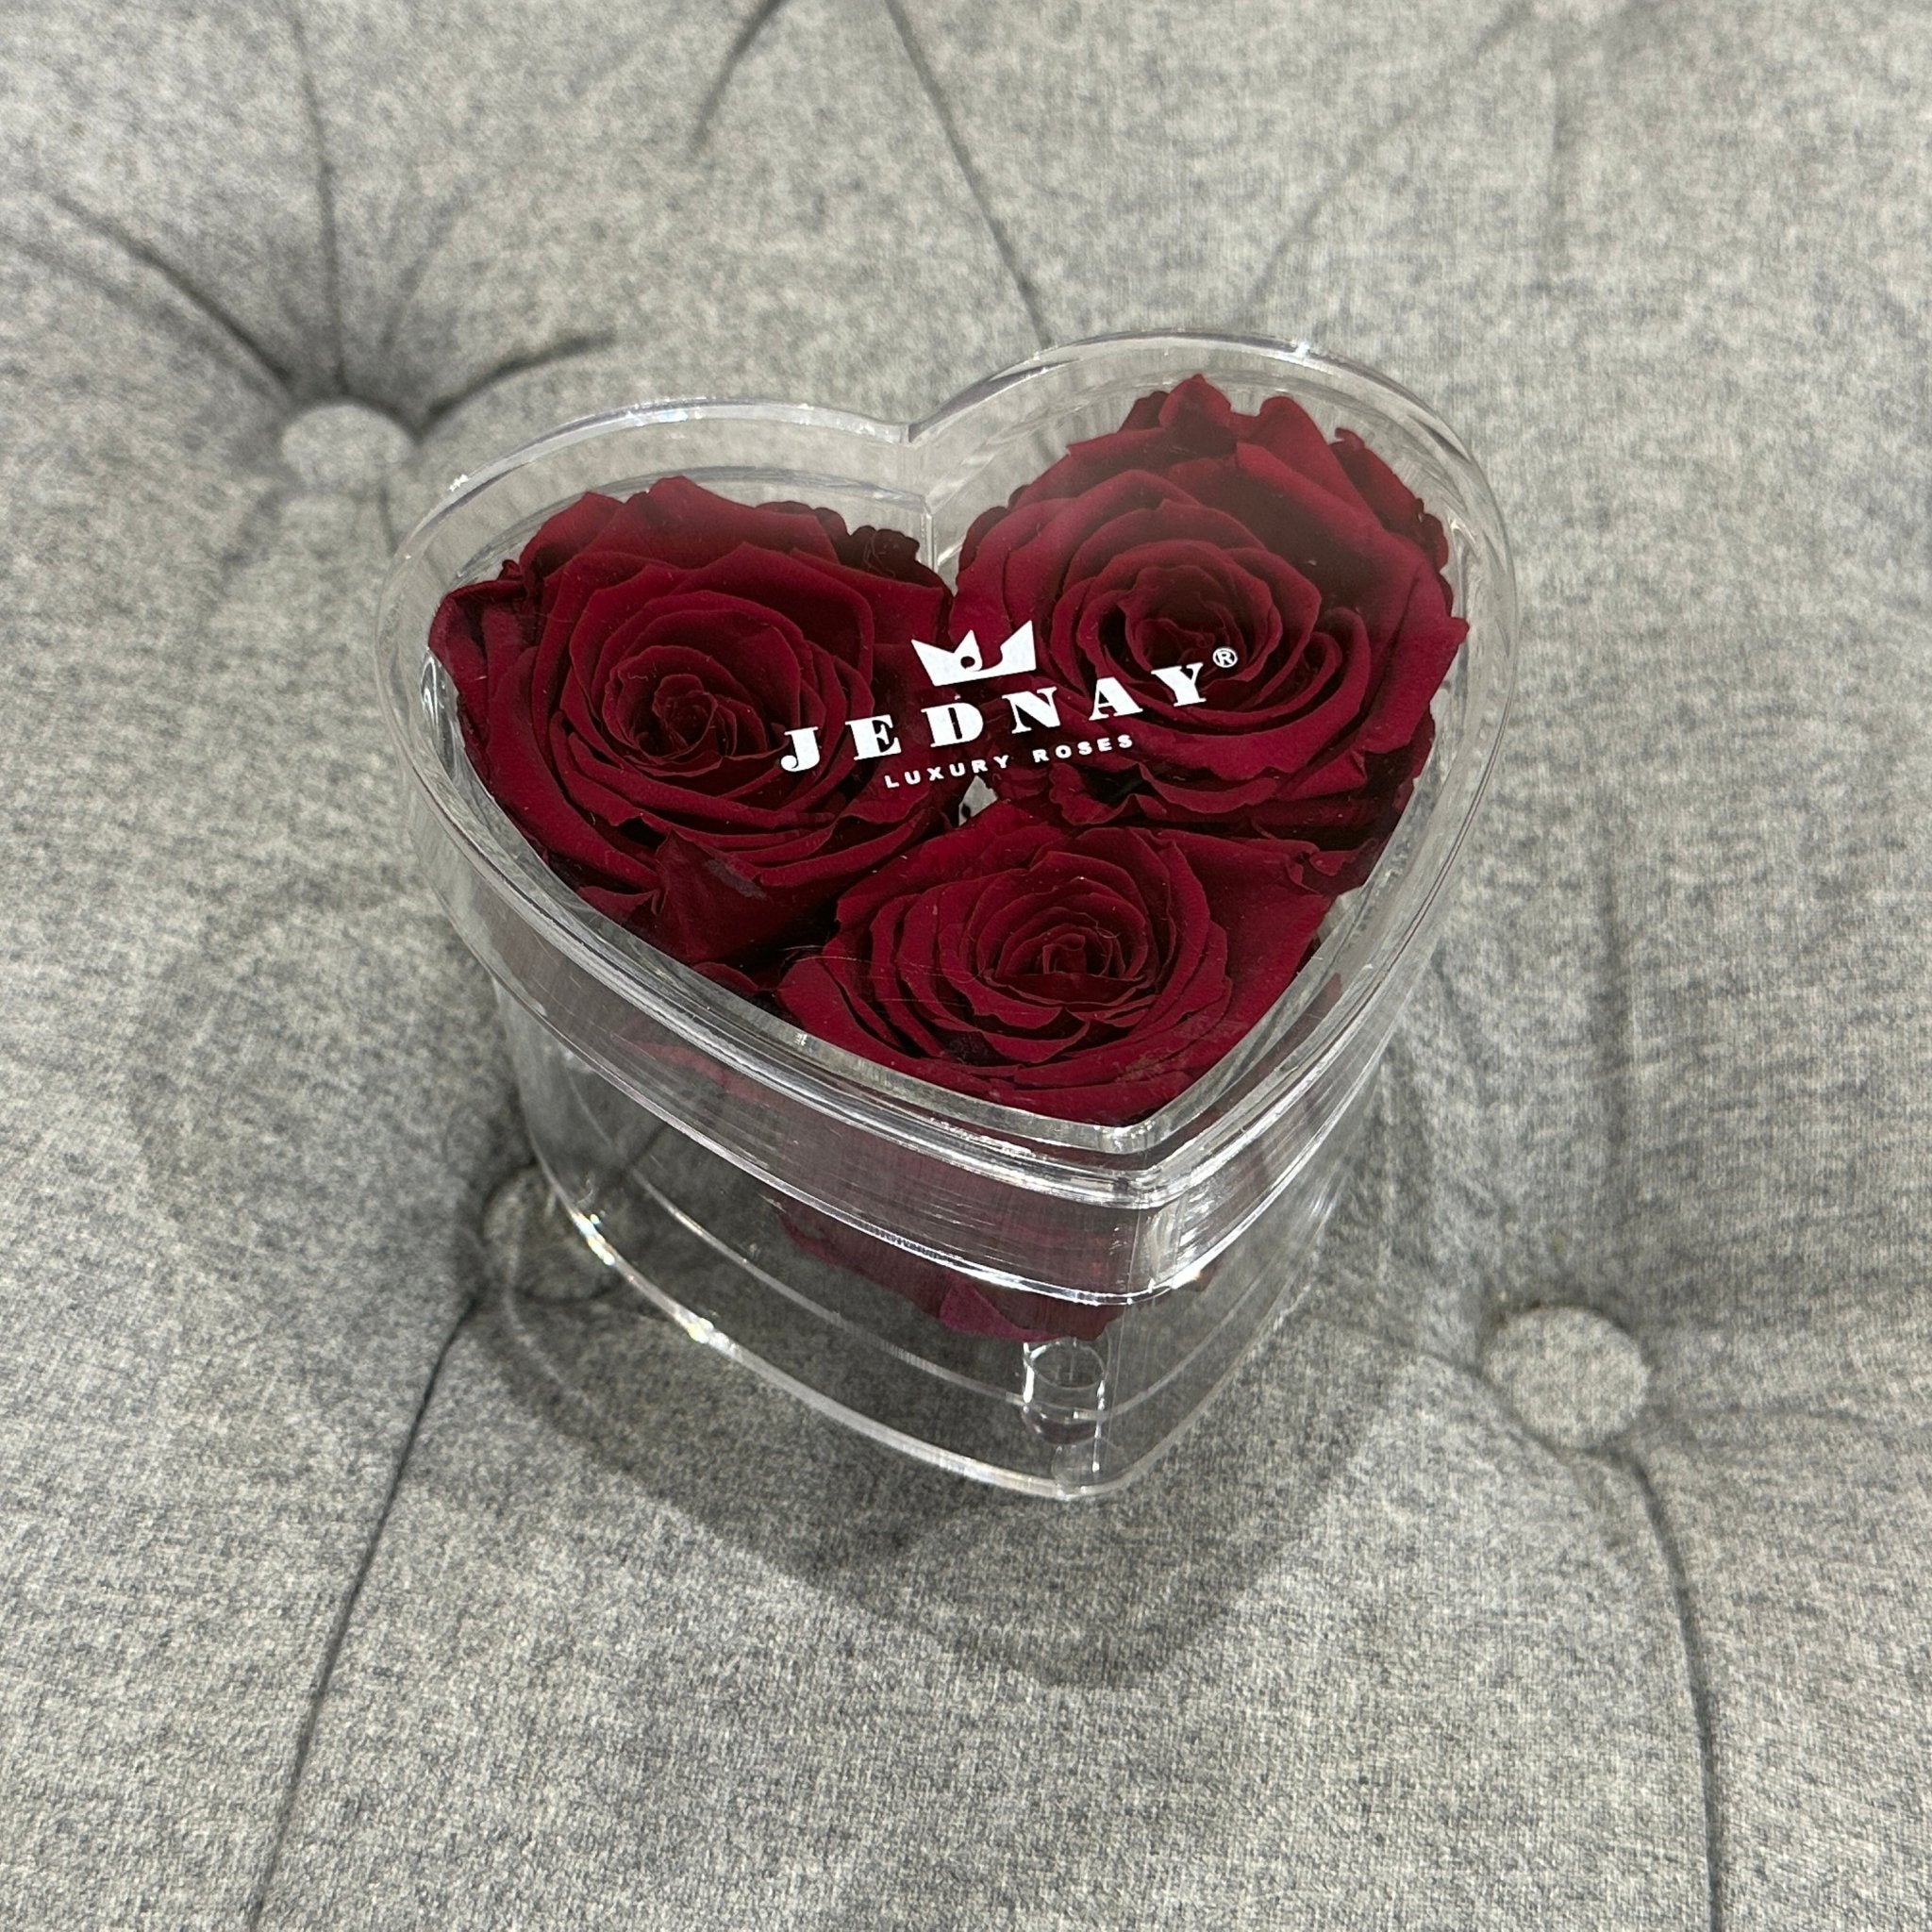 The Clarity Love Three - Red Red Wine Eternal Roses - Jednay Roses